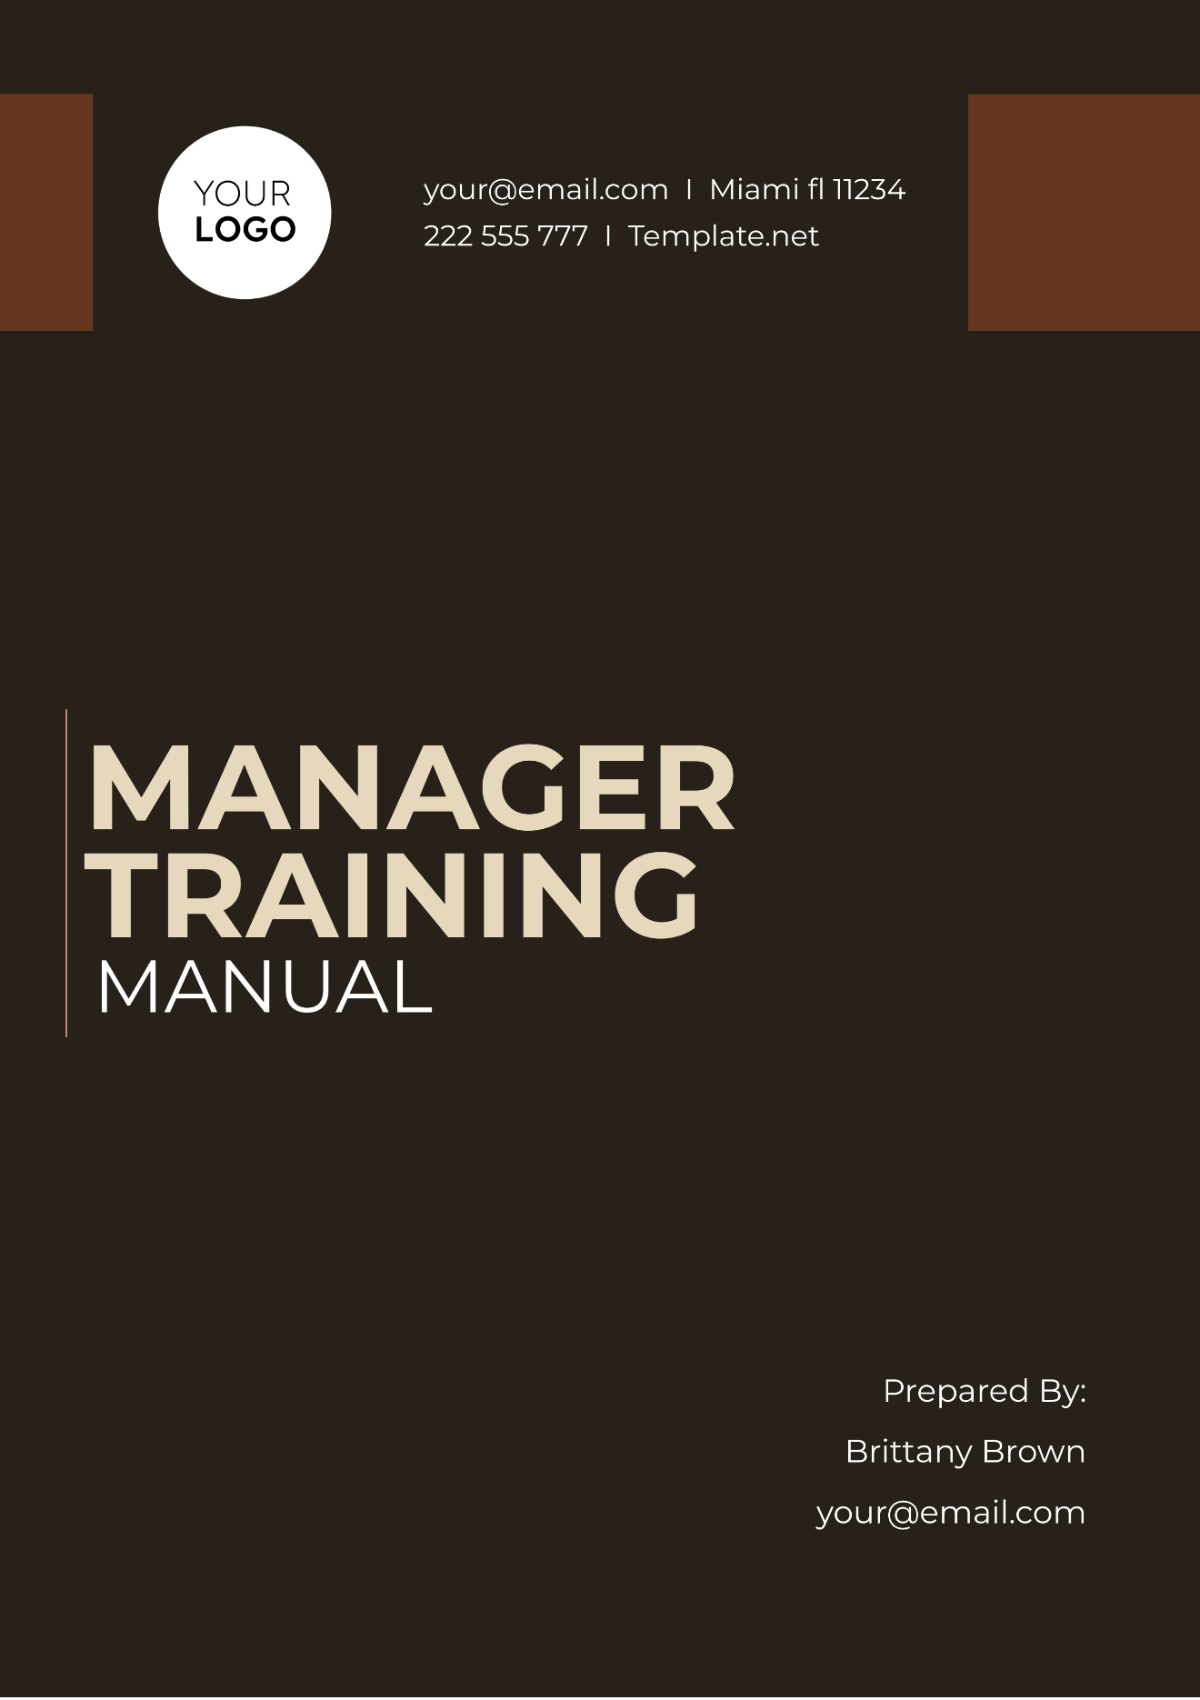  Manager Training Manual Template